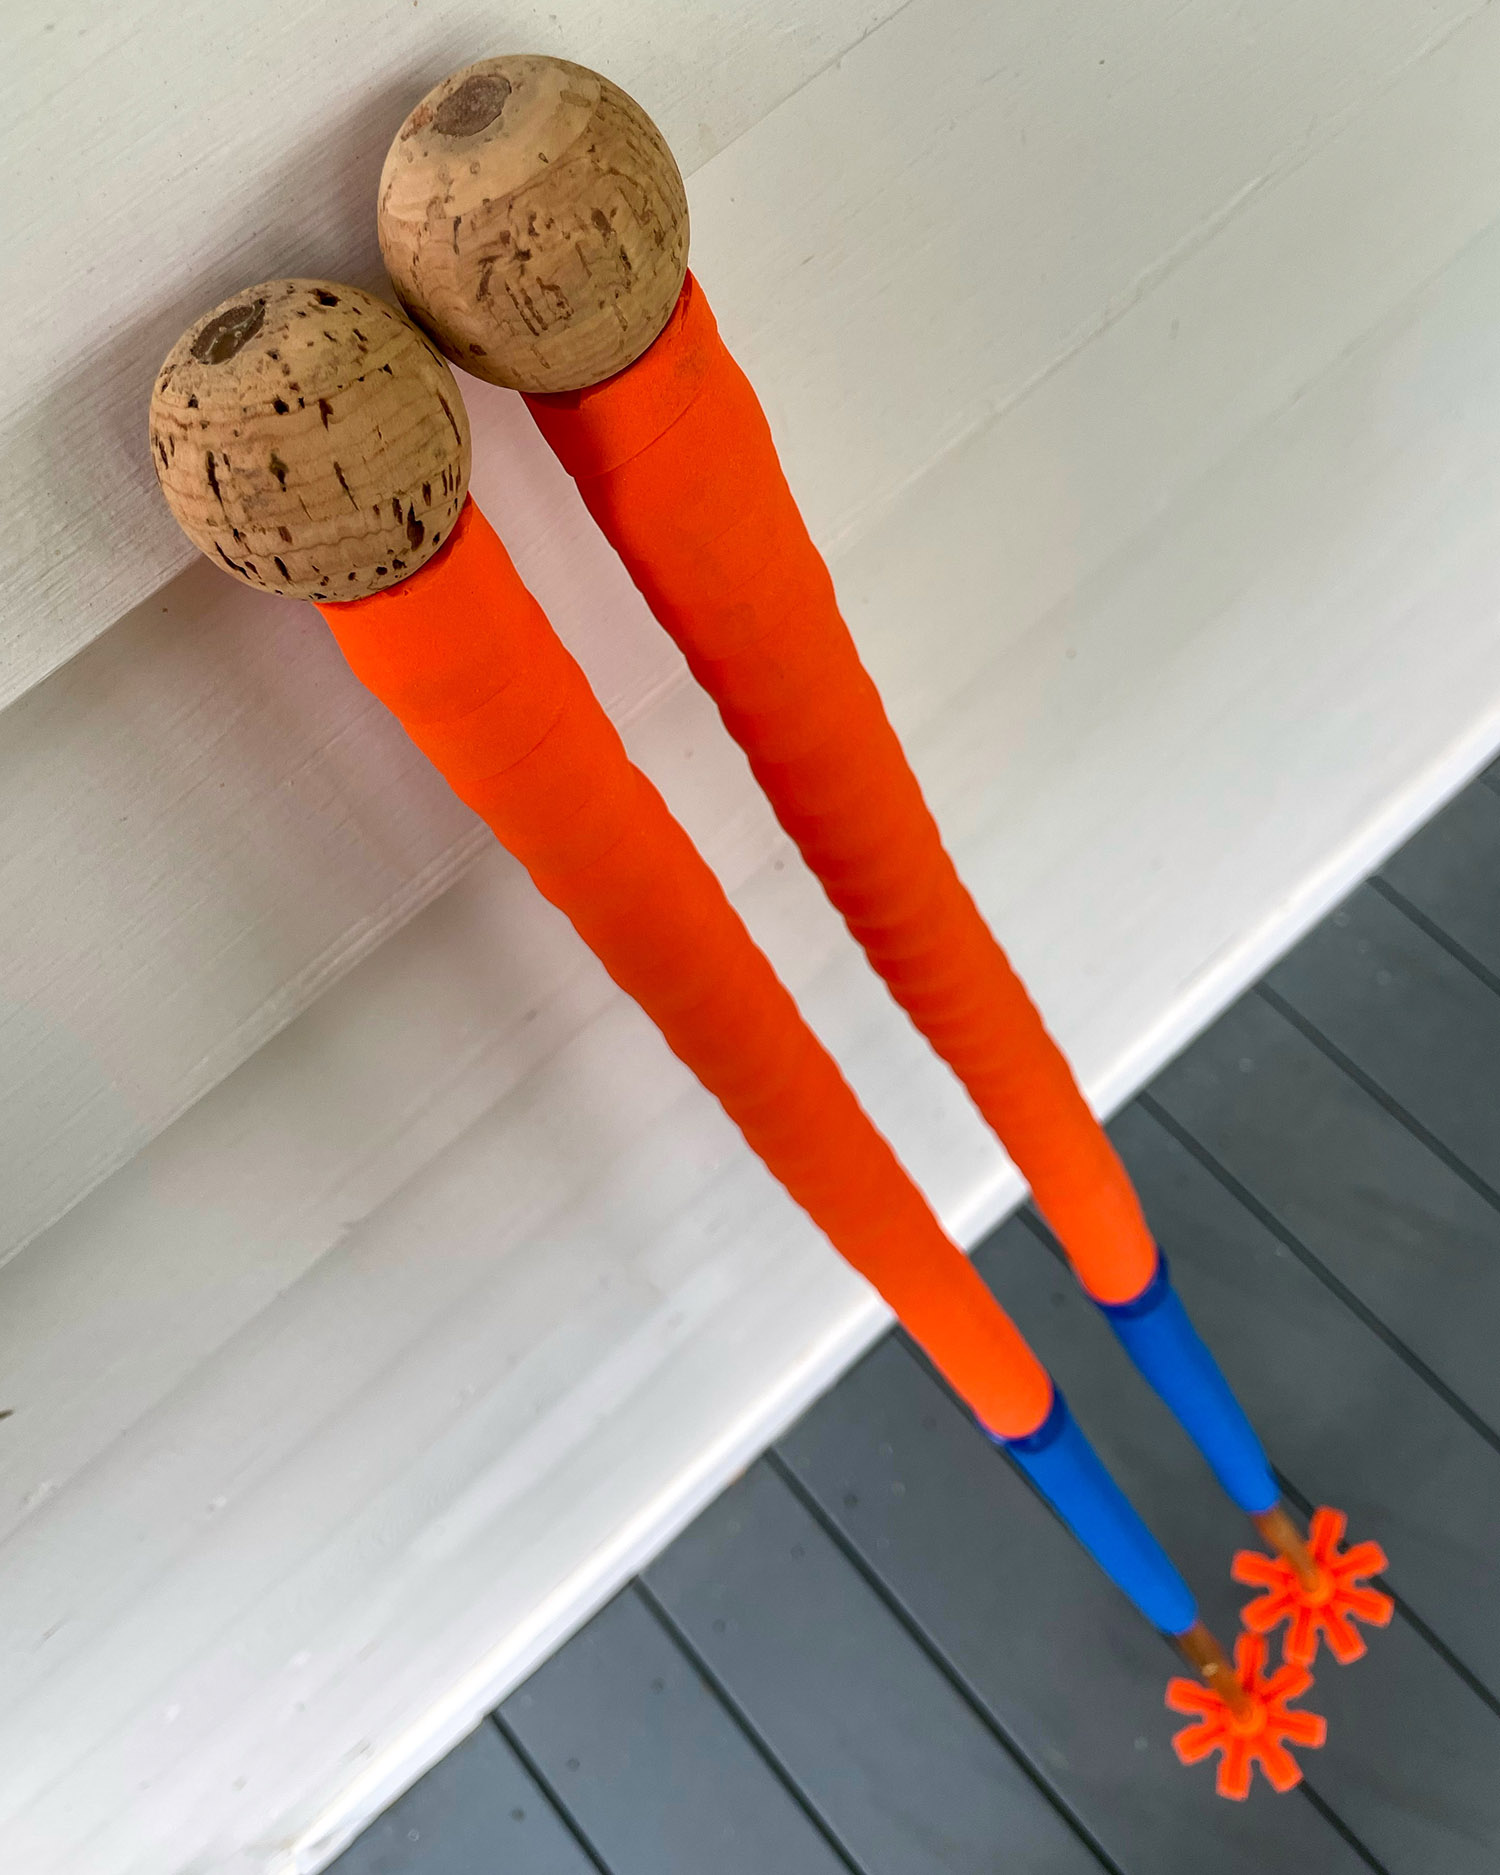 Bamboo ski touring poles with orange and blue handlebar tape for grip extension.